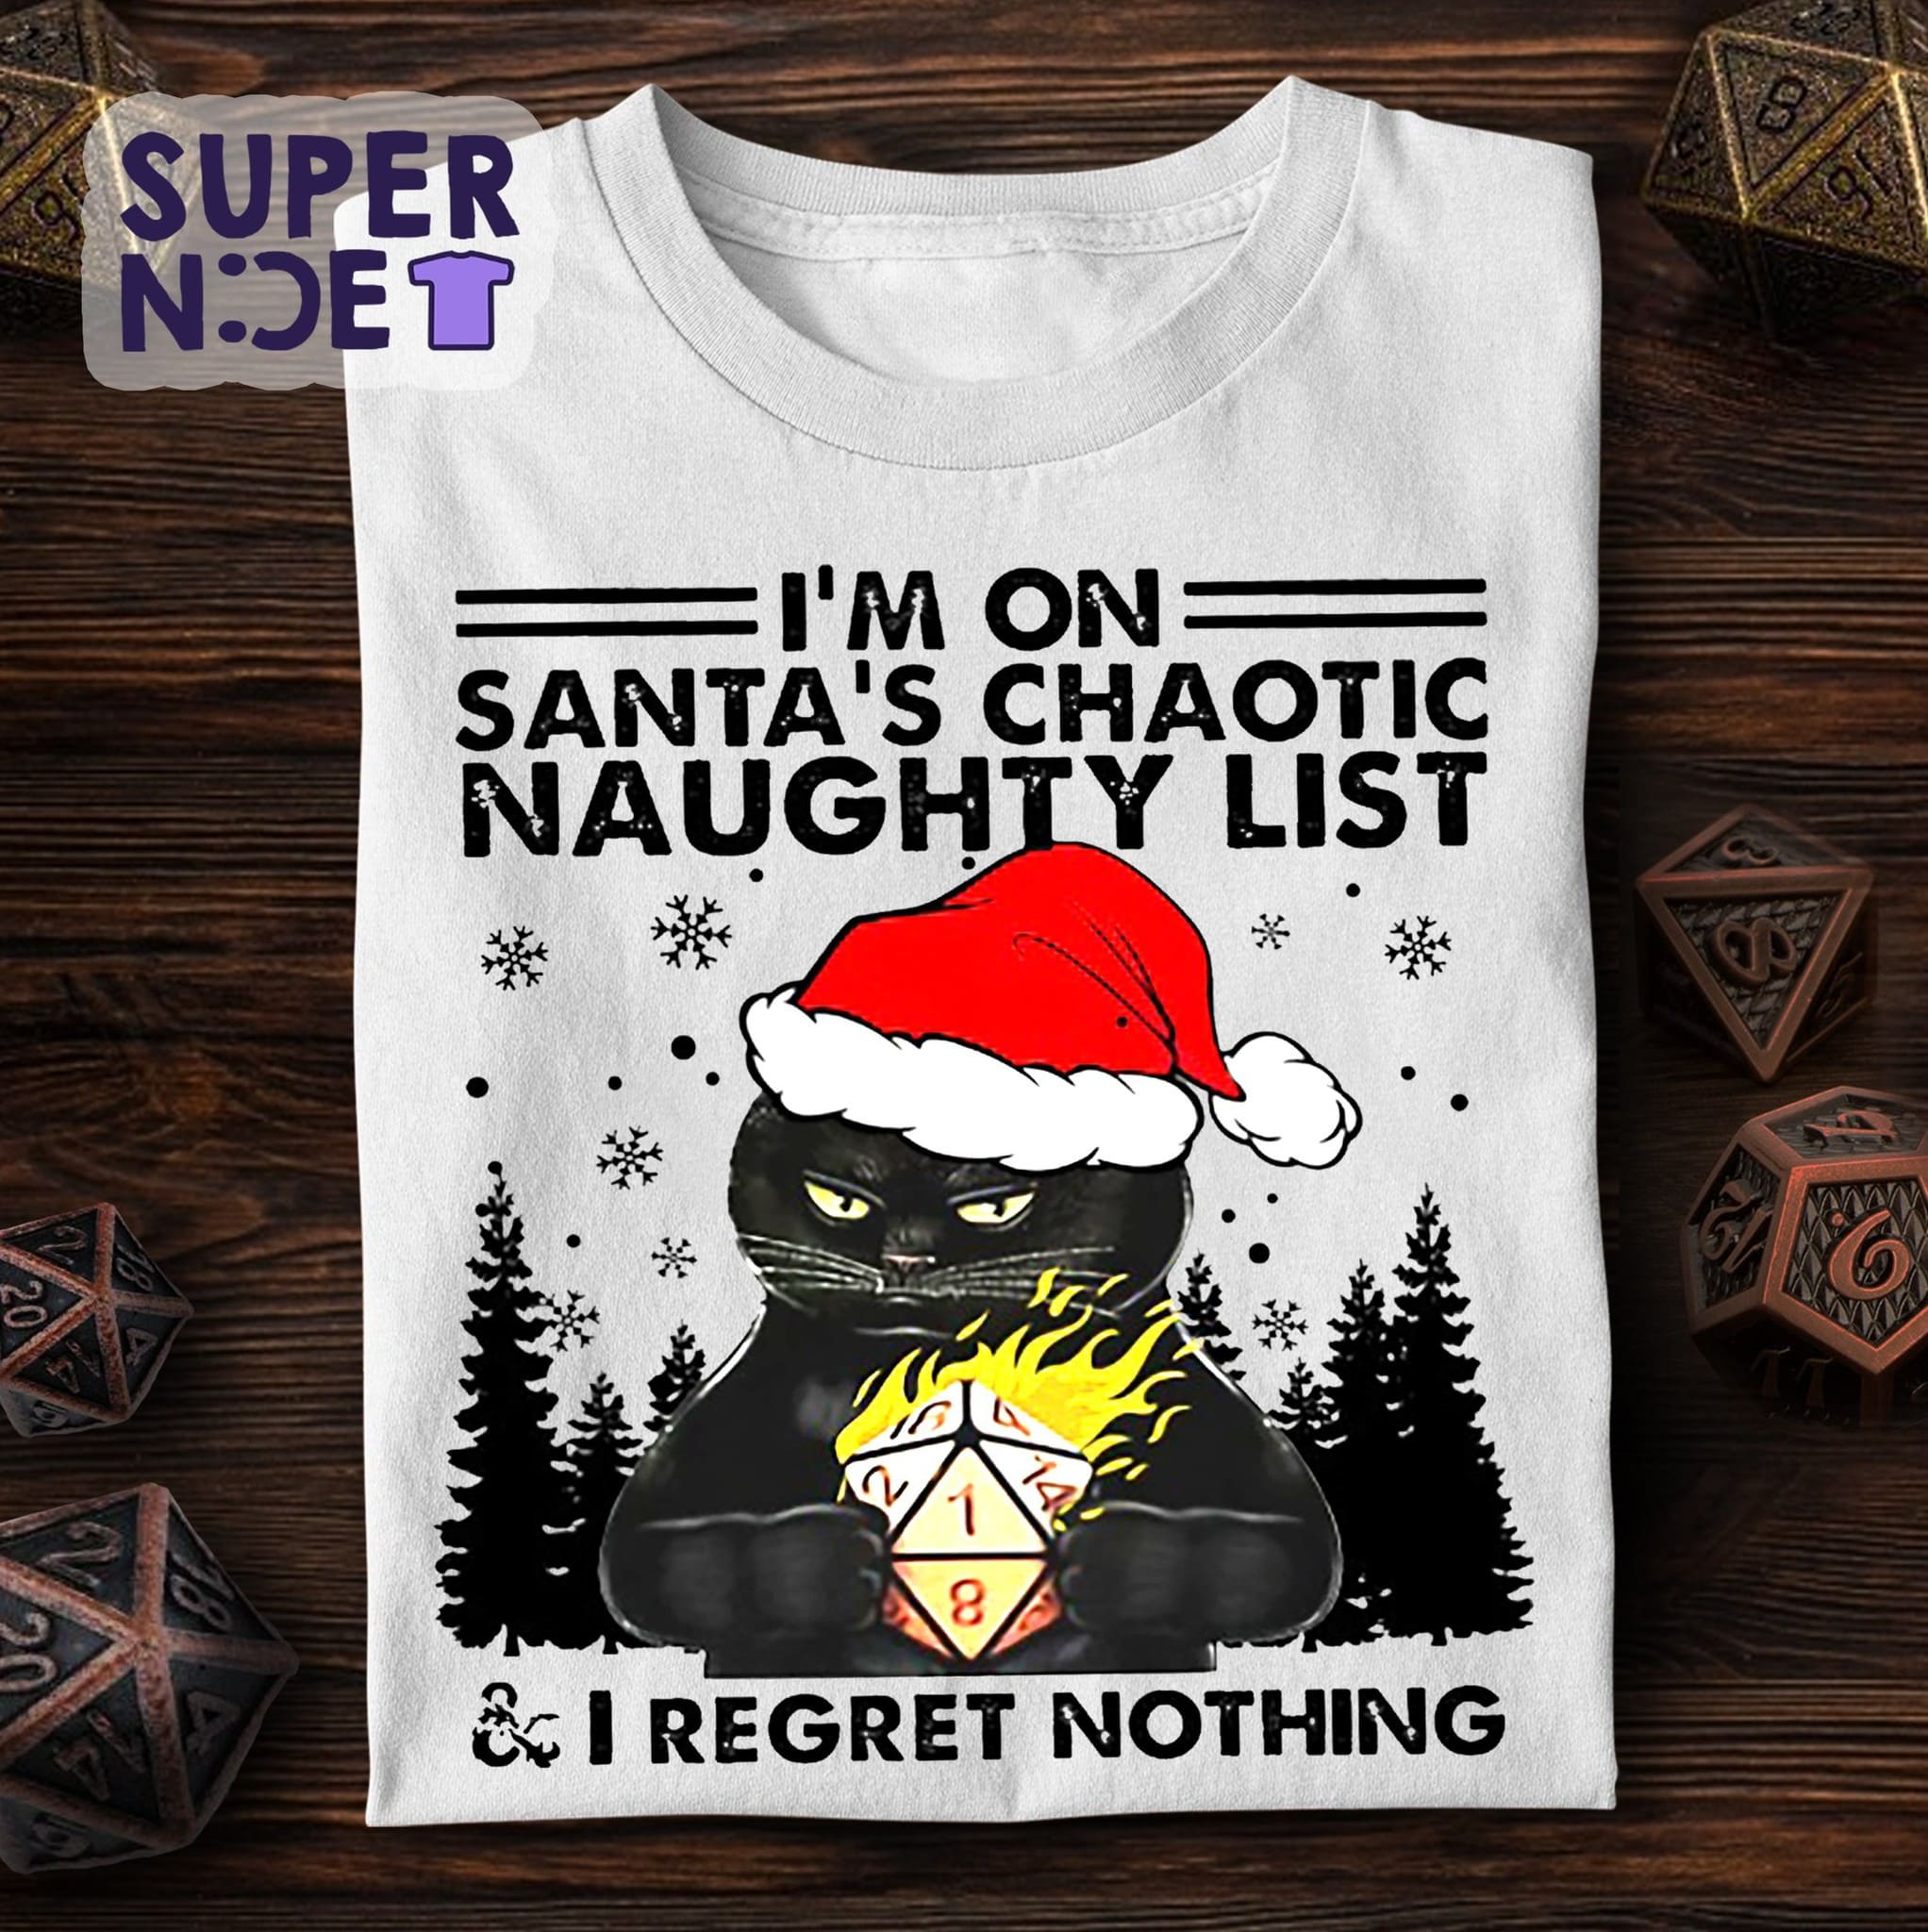 I'm on Santa's chaotic naughty list and I regret nothing - Dungeons and Dragons, Black cat and dices